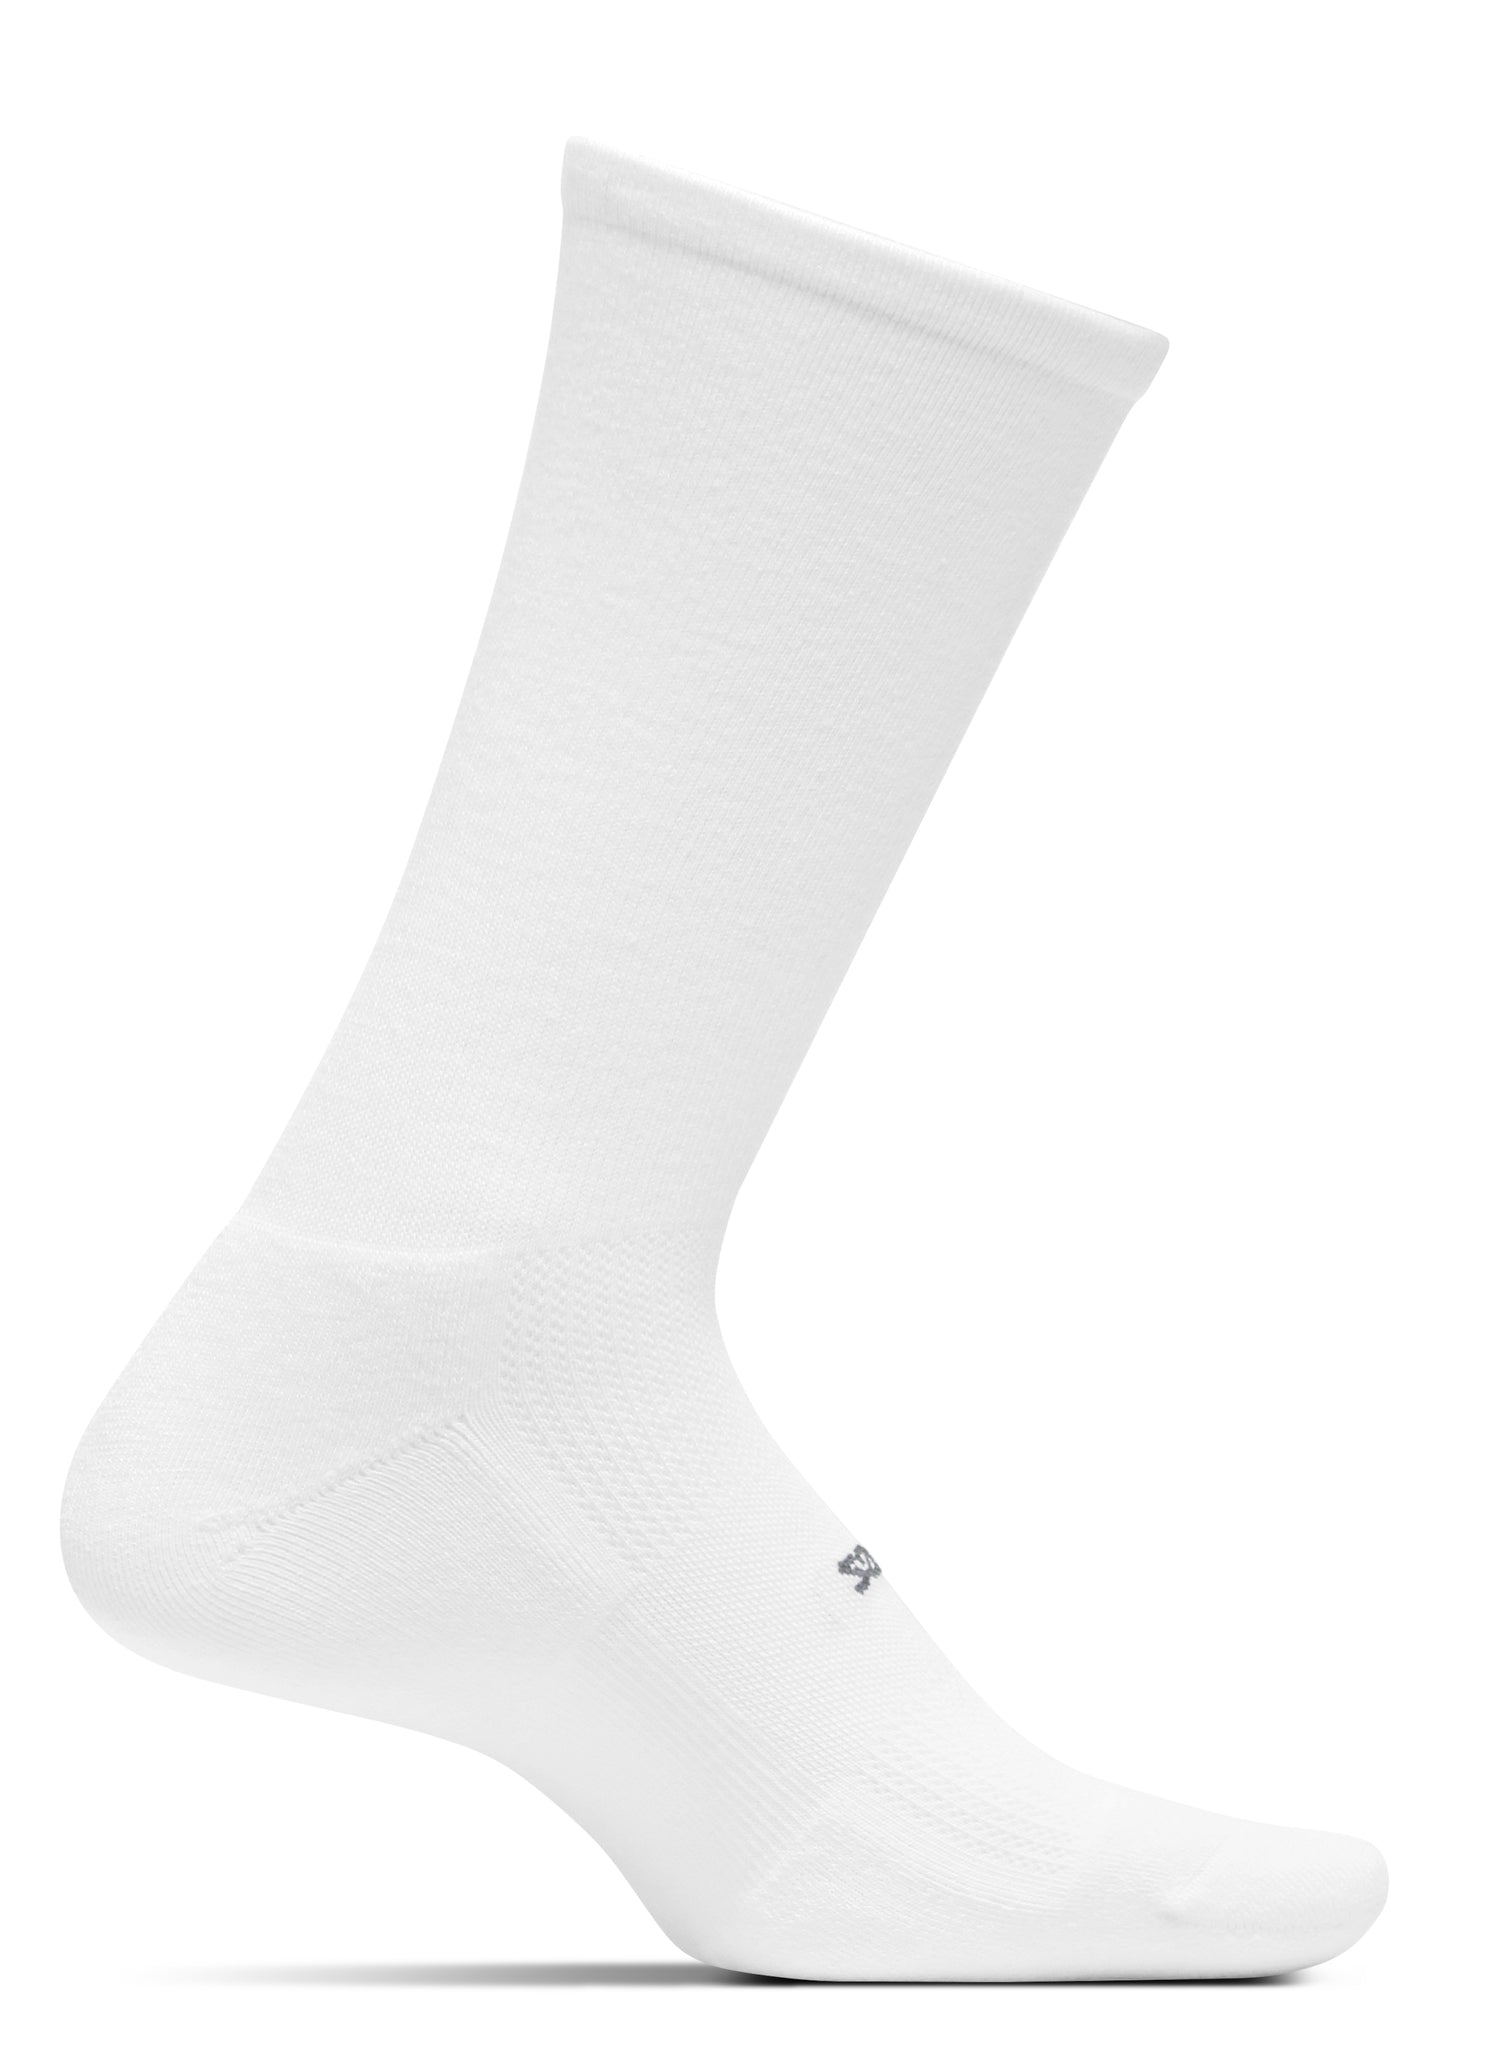 Medial view of the Feetures High Performance Cushion crew sock in the color white